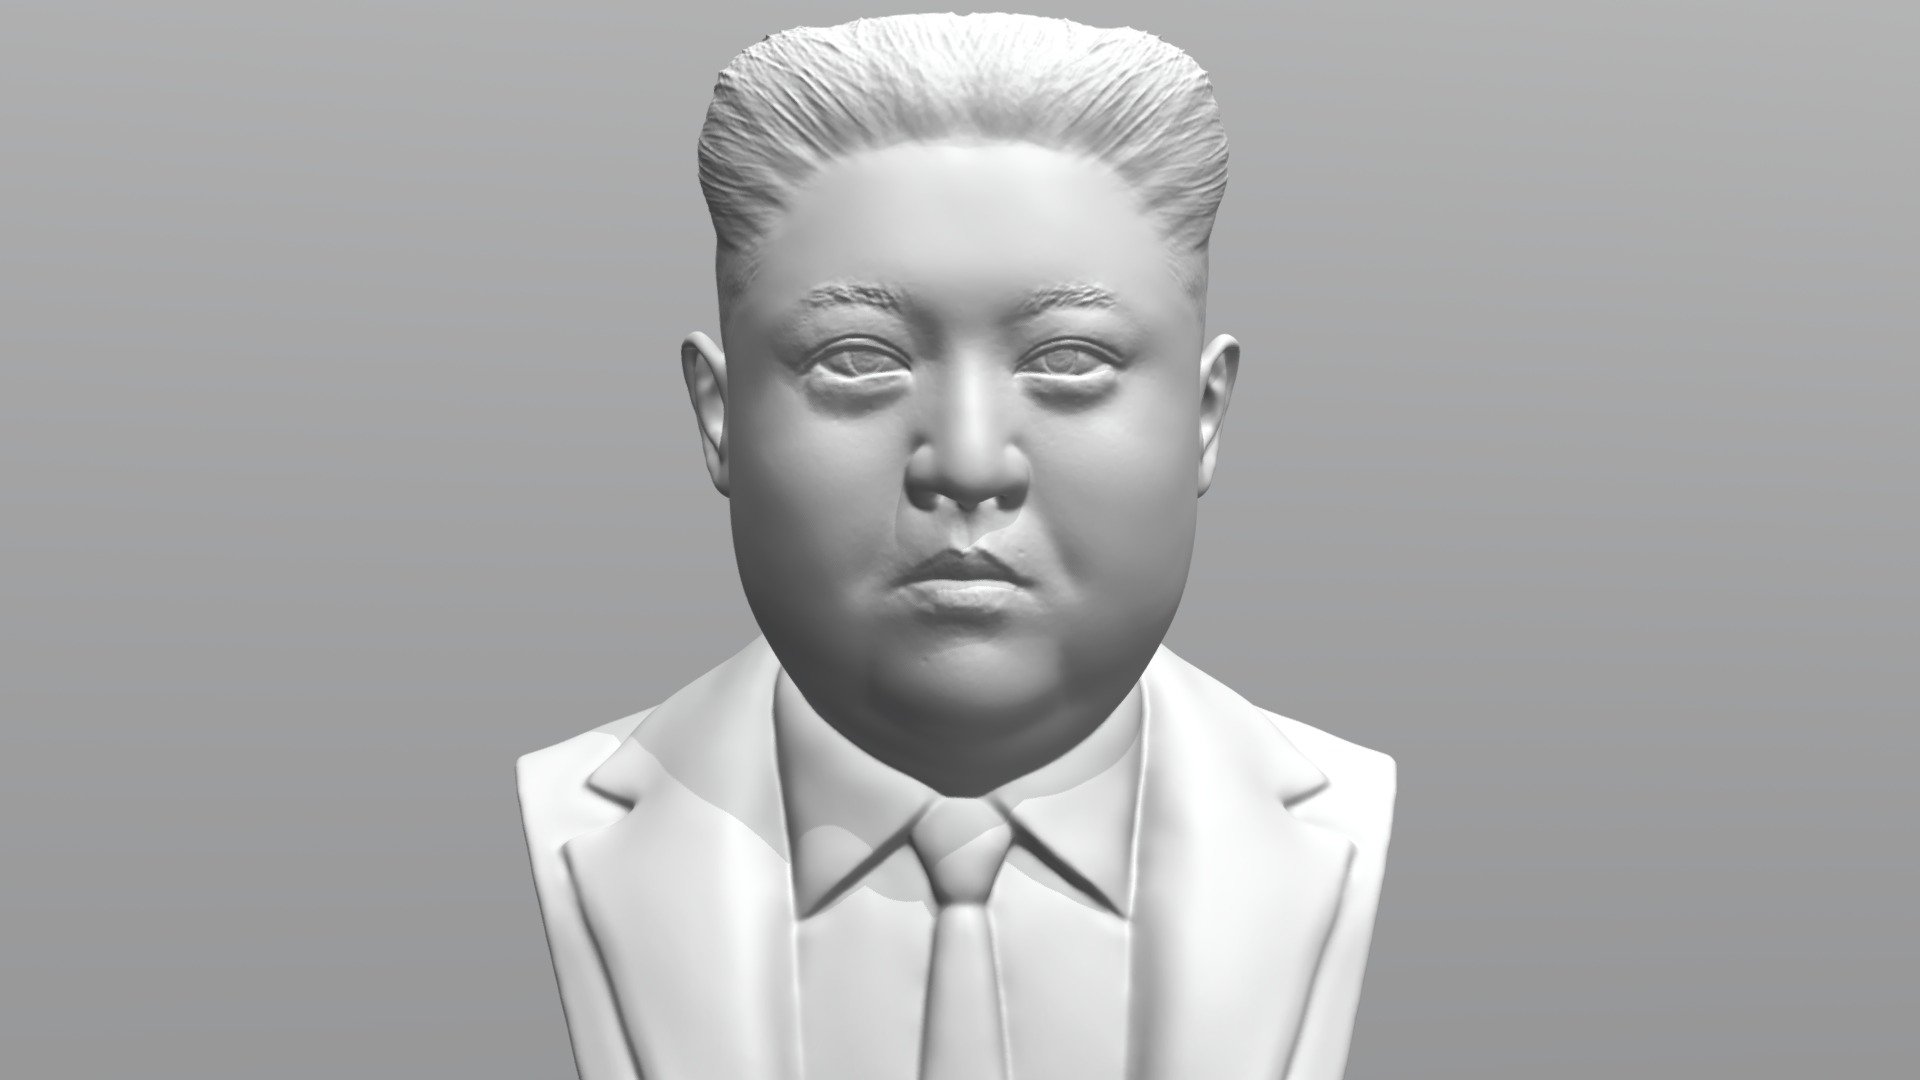 Here is Kim Jong-un bust 3D model ready for 3D printing. The model current size is 5 cm height, but you are free to scale it. Zip file contains stl. The model was created in ZBrush.

If you have any questions please don’t hesitate to contact me. I will respond you ASAP. I encourage you to check my other celebrity 3D models 3d model